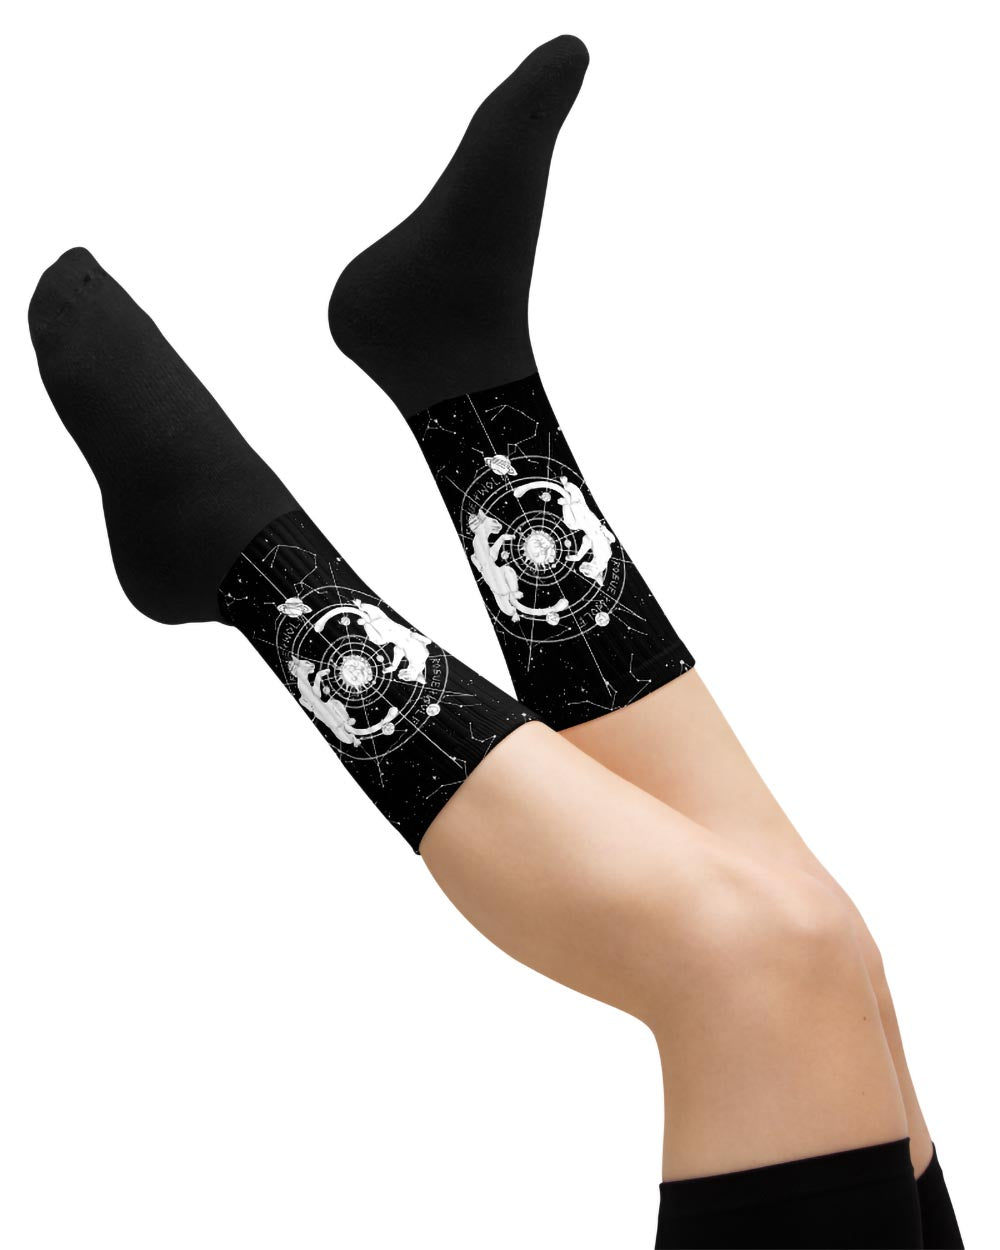 Purr Nebula Socks - Vegan Unisex Goth Socks  Witchy Alt Style Cool Gothic Gifts for Him and Her Spooky Cute Socks